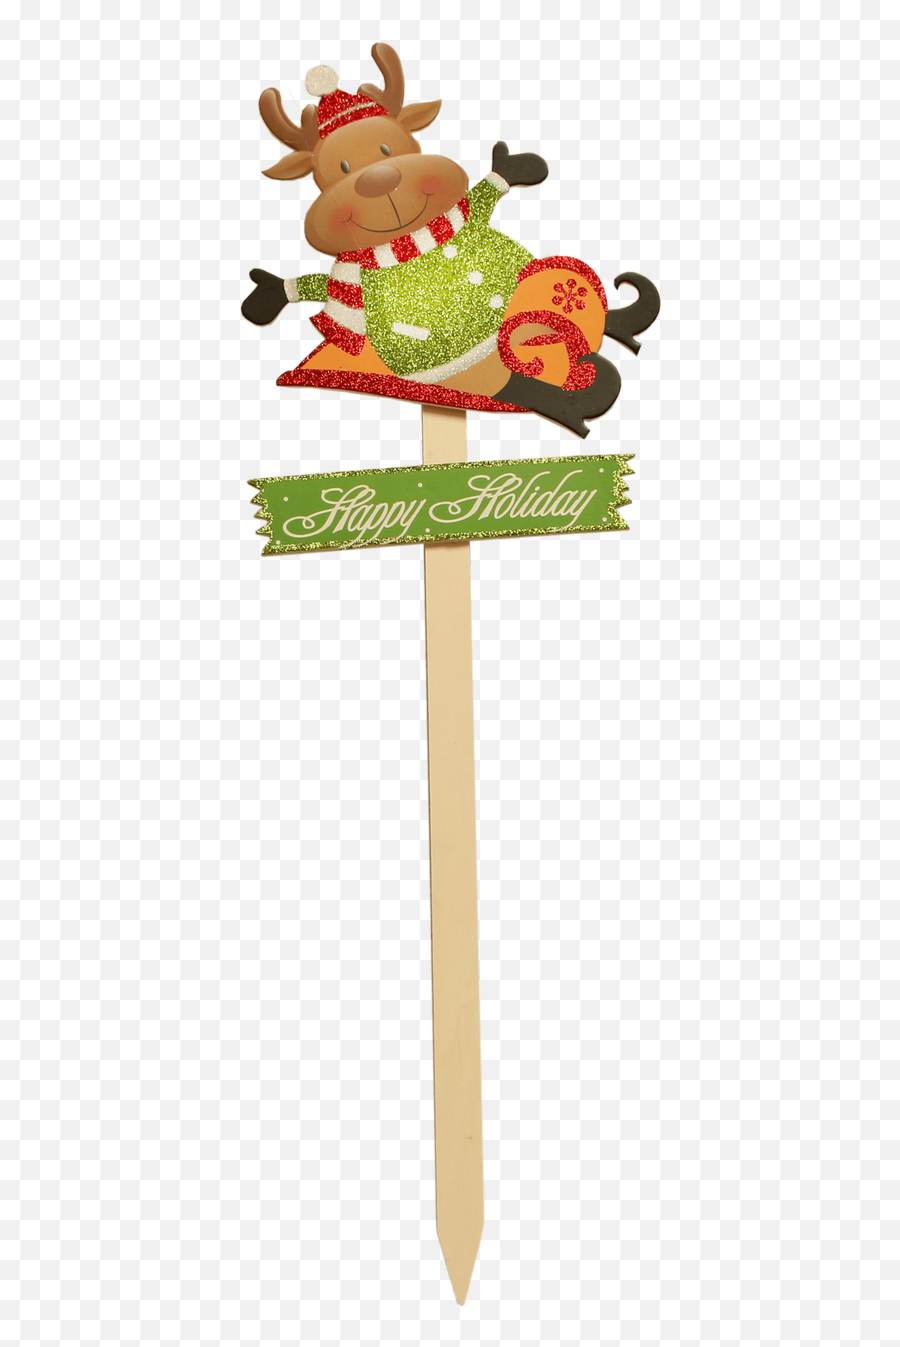 Christmas Reindeer With Sled Happy Holiday Pick Emoji,Blinking Lights Reindeer Emoticon Christmas